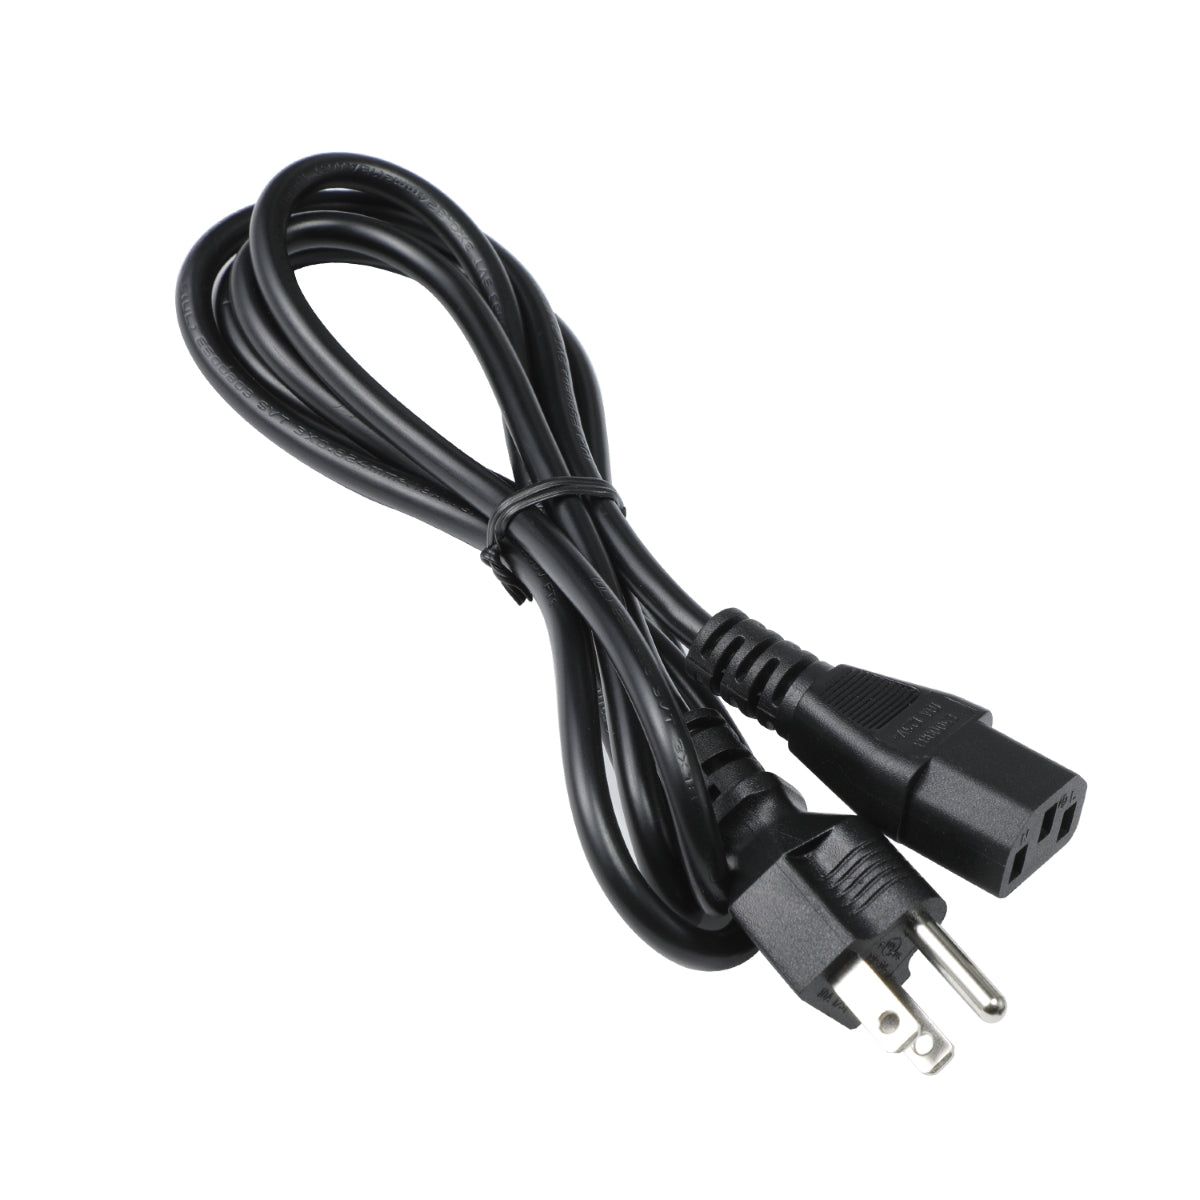 Power Cord for ViewSonic TD2210 Monitor